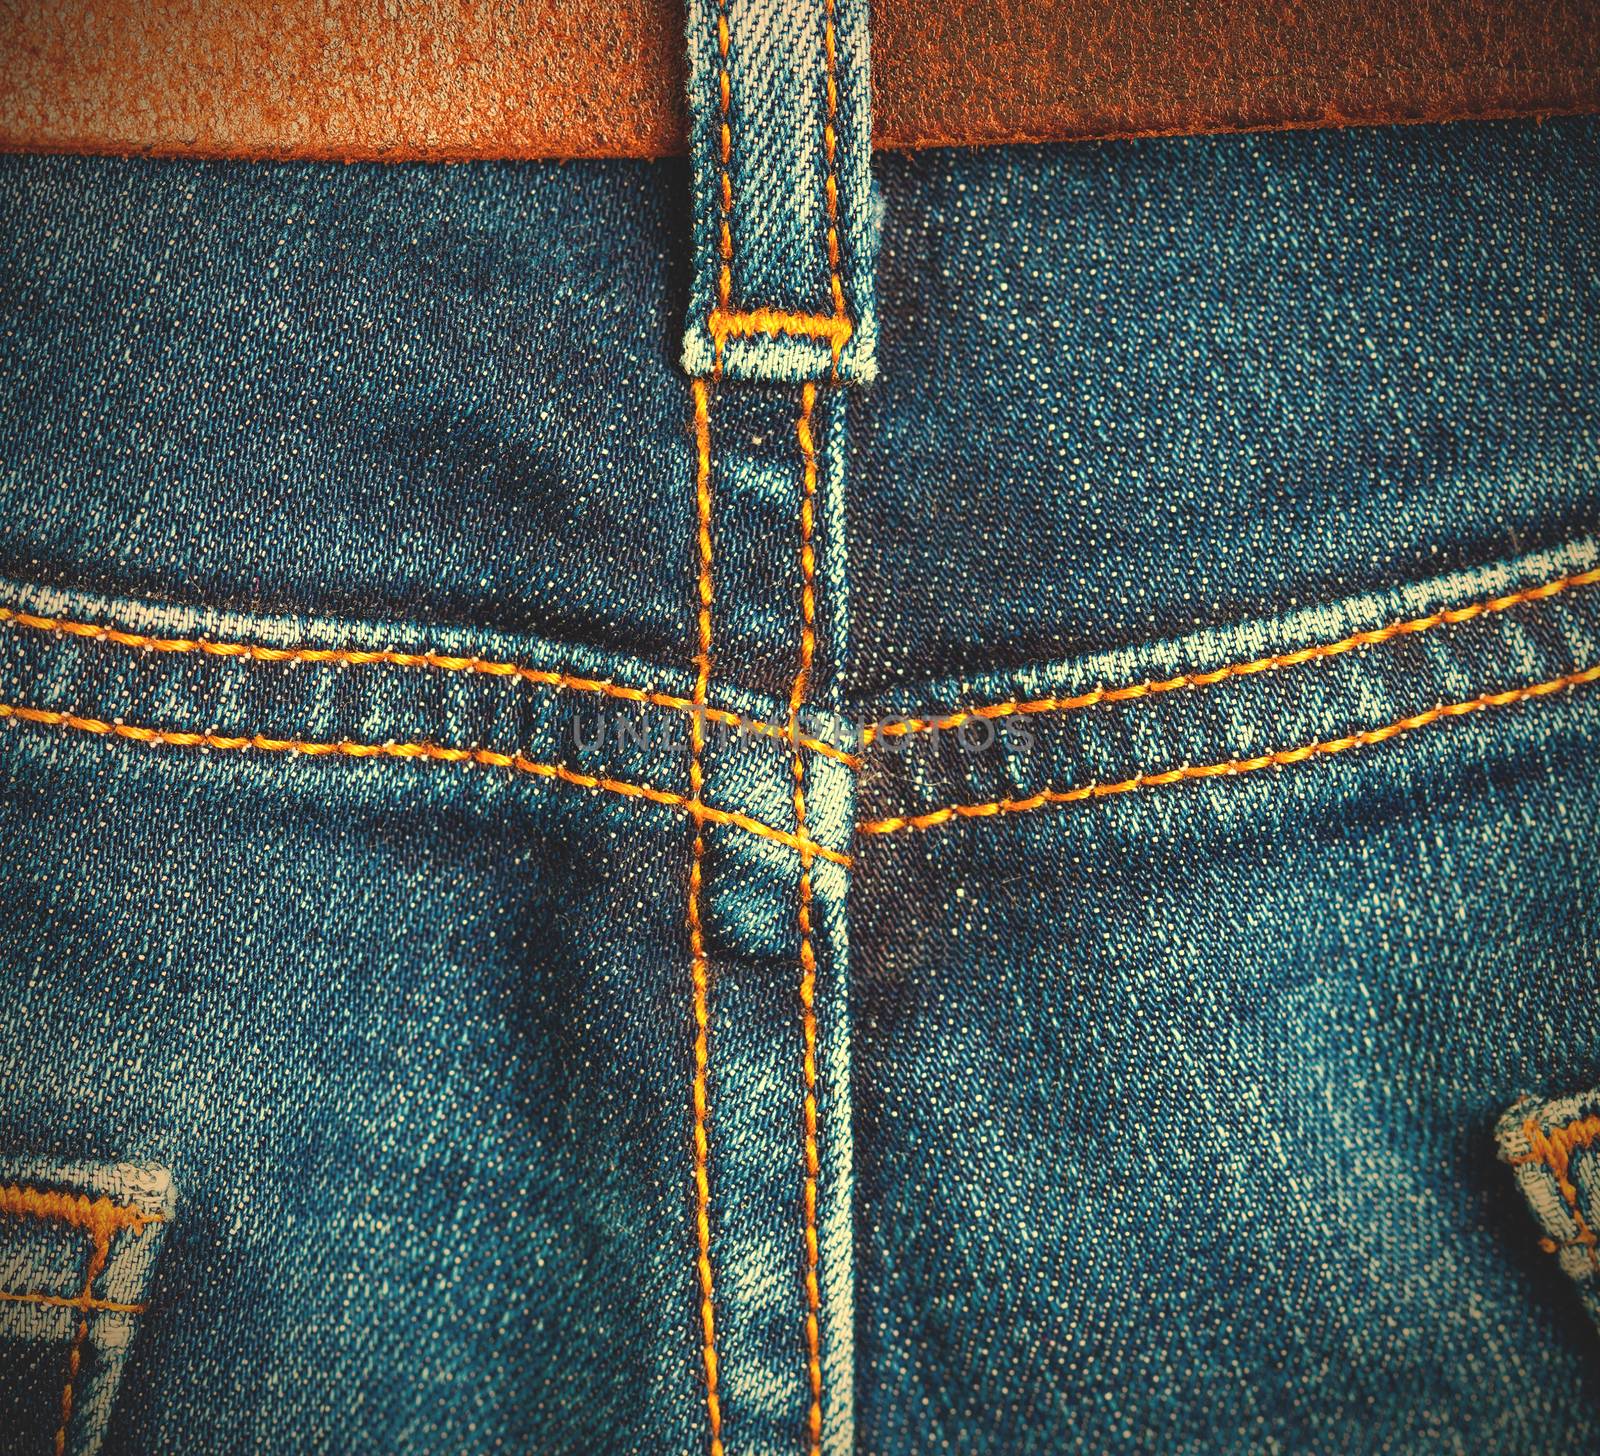 jeans, back view. close up. instagram image style